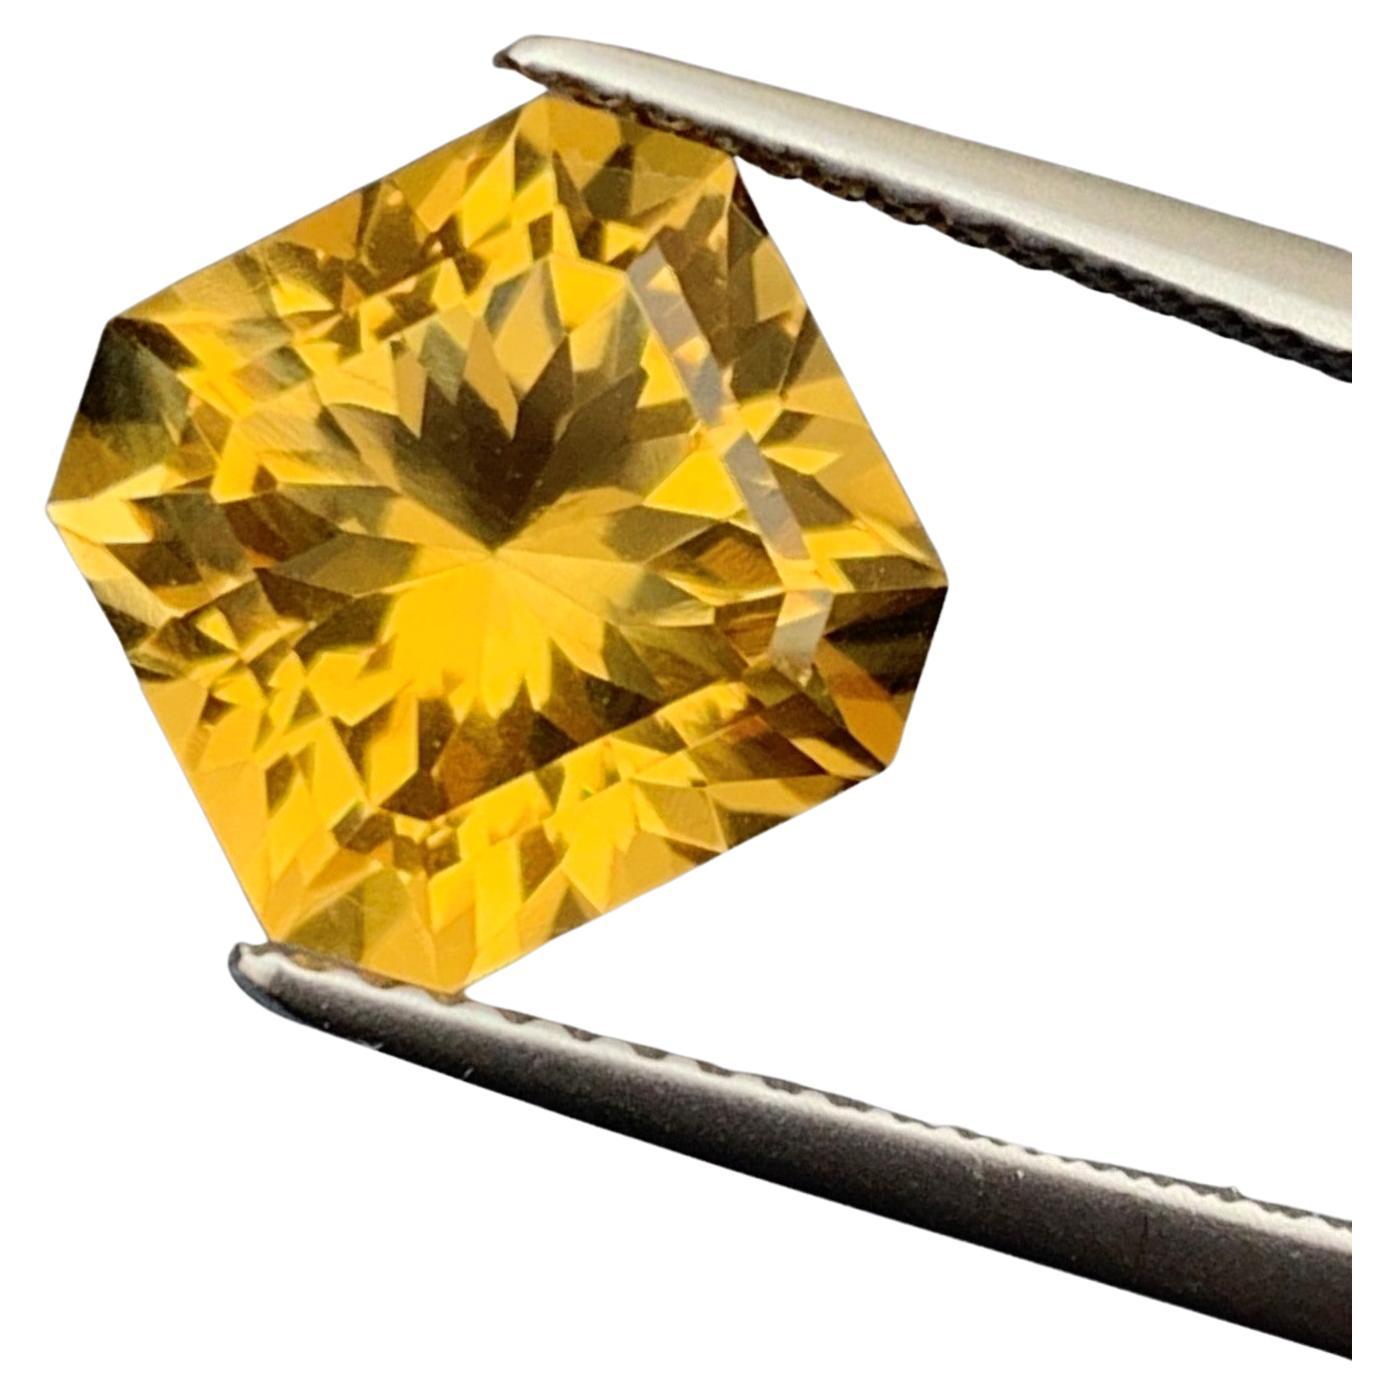 Gorgeous Flower Cut Faceted Yellow Citrine 3.80 Carat From Brazil For Sale